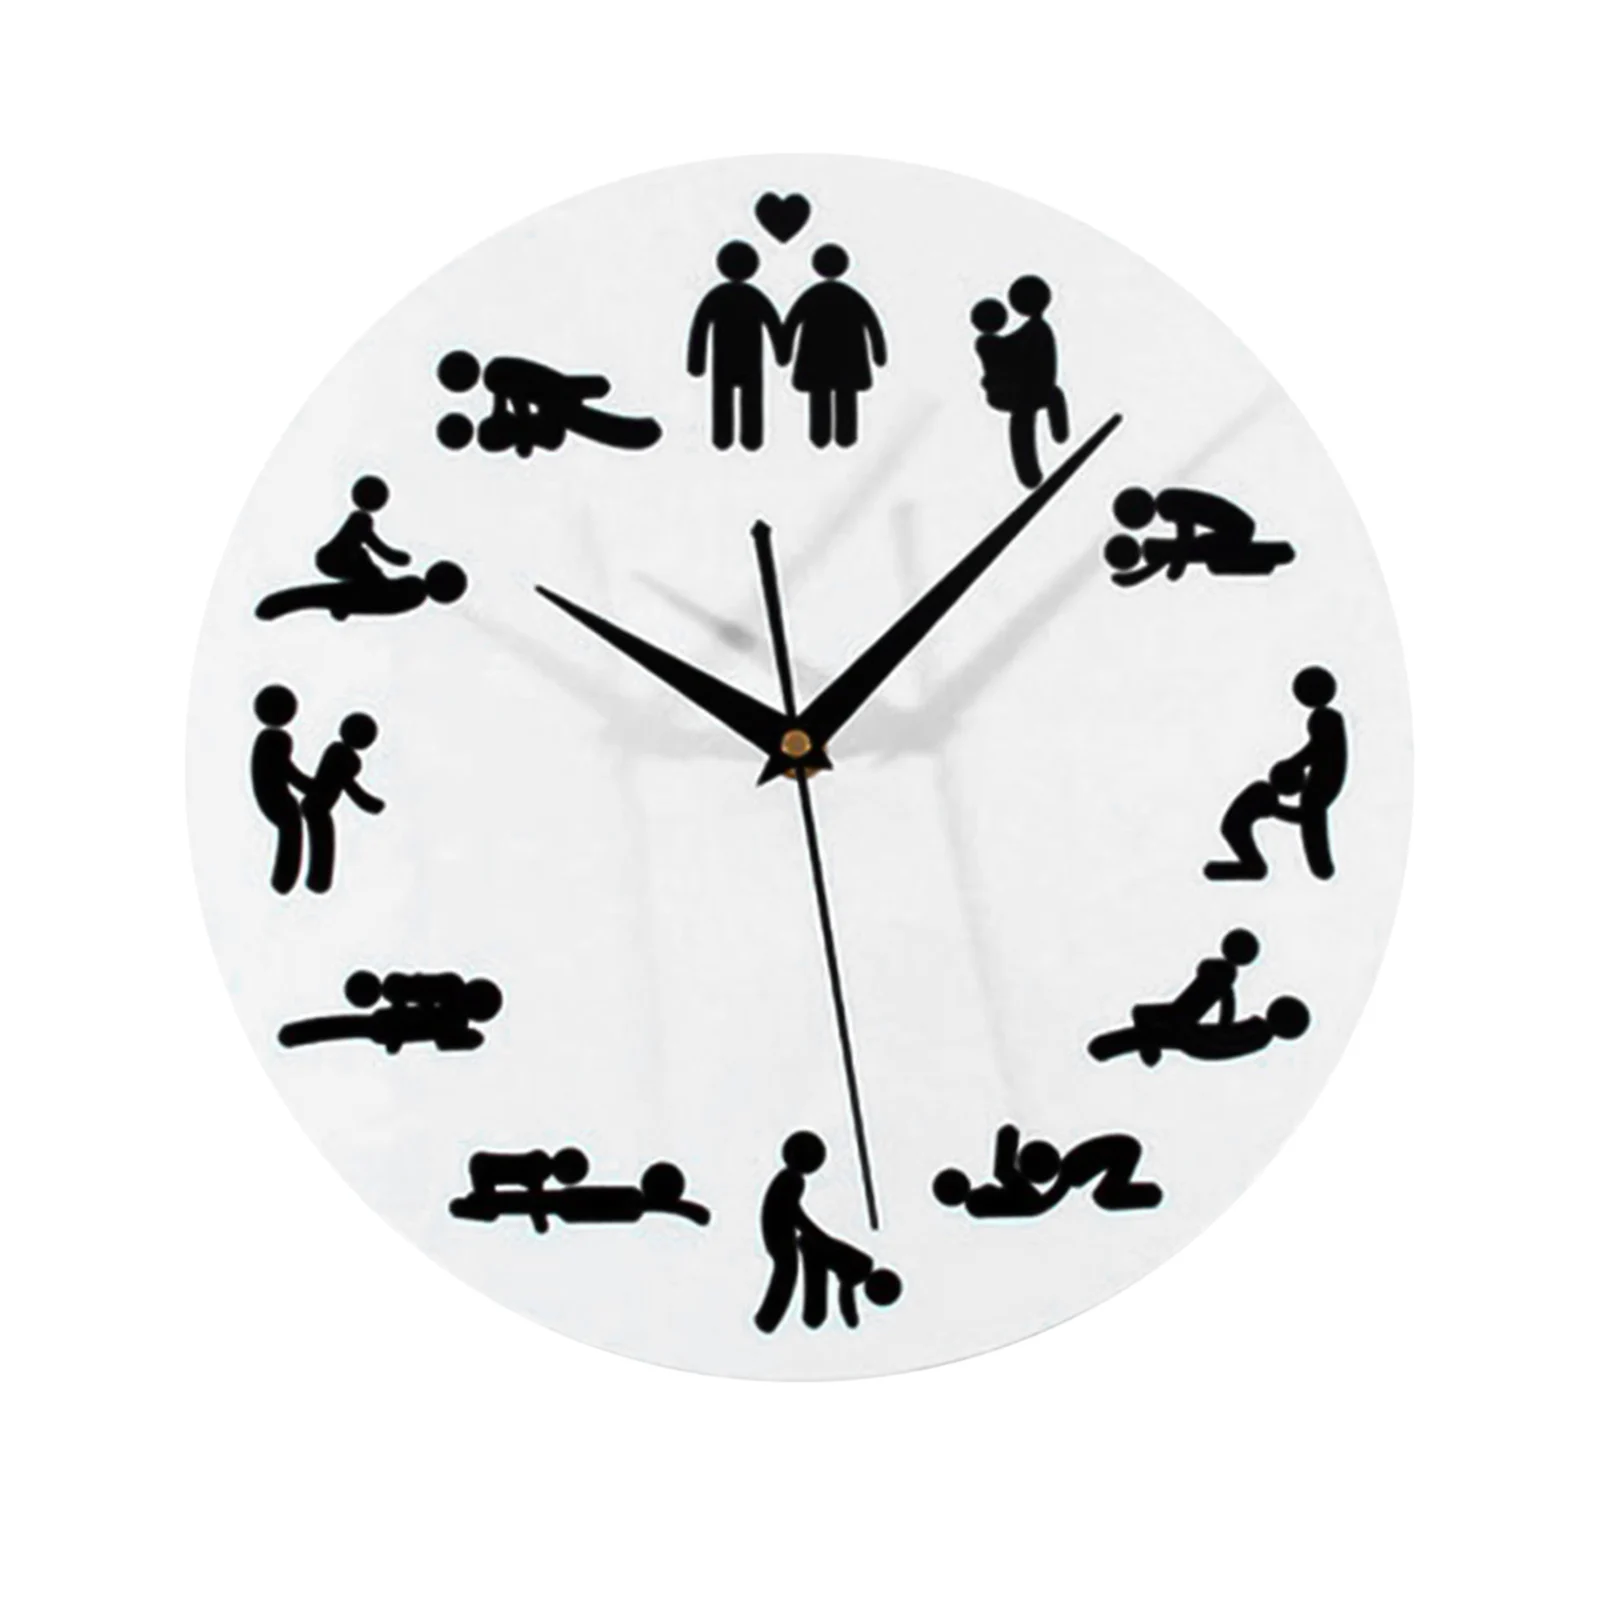 24 Hours Sexual Positions Quartz Wall Clock Adult Sex Game Wall Watch Sex Watch Wall Hanging Clock Friends Gift